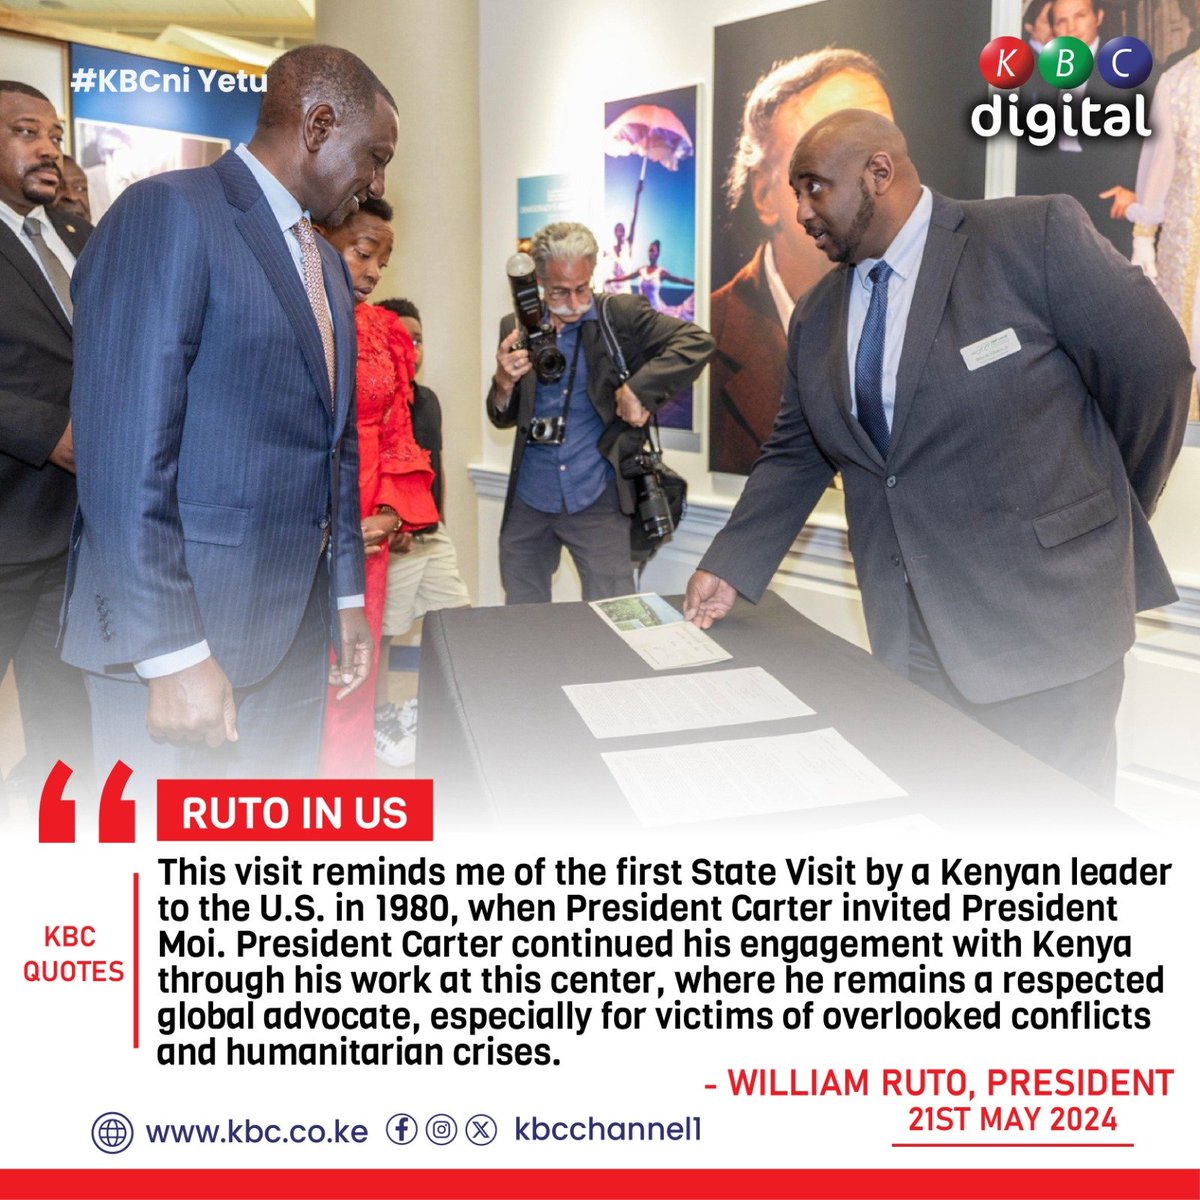 'This visit reminds me of the first State Visit by a Kenyan leader to the U.S. in 1980, when President Carter invited President Moi. President Carter continued his engagement with Kenya through his work at this center, where he remains a respected global advocate, especially for